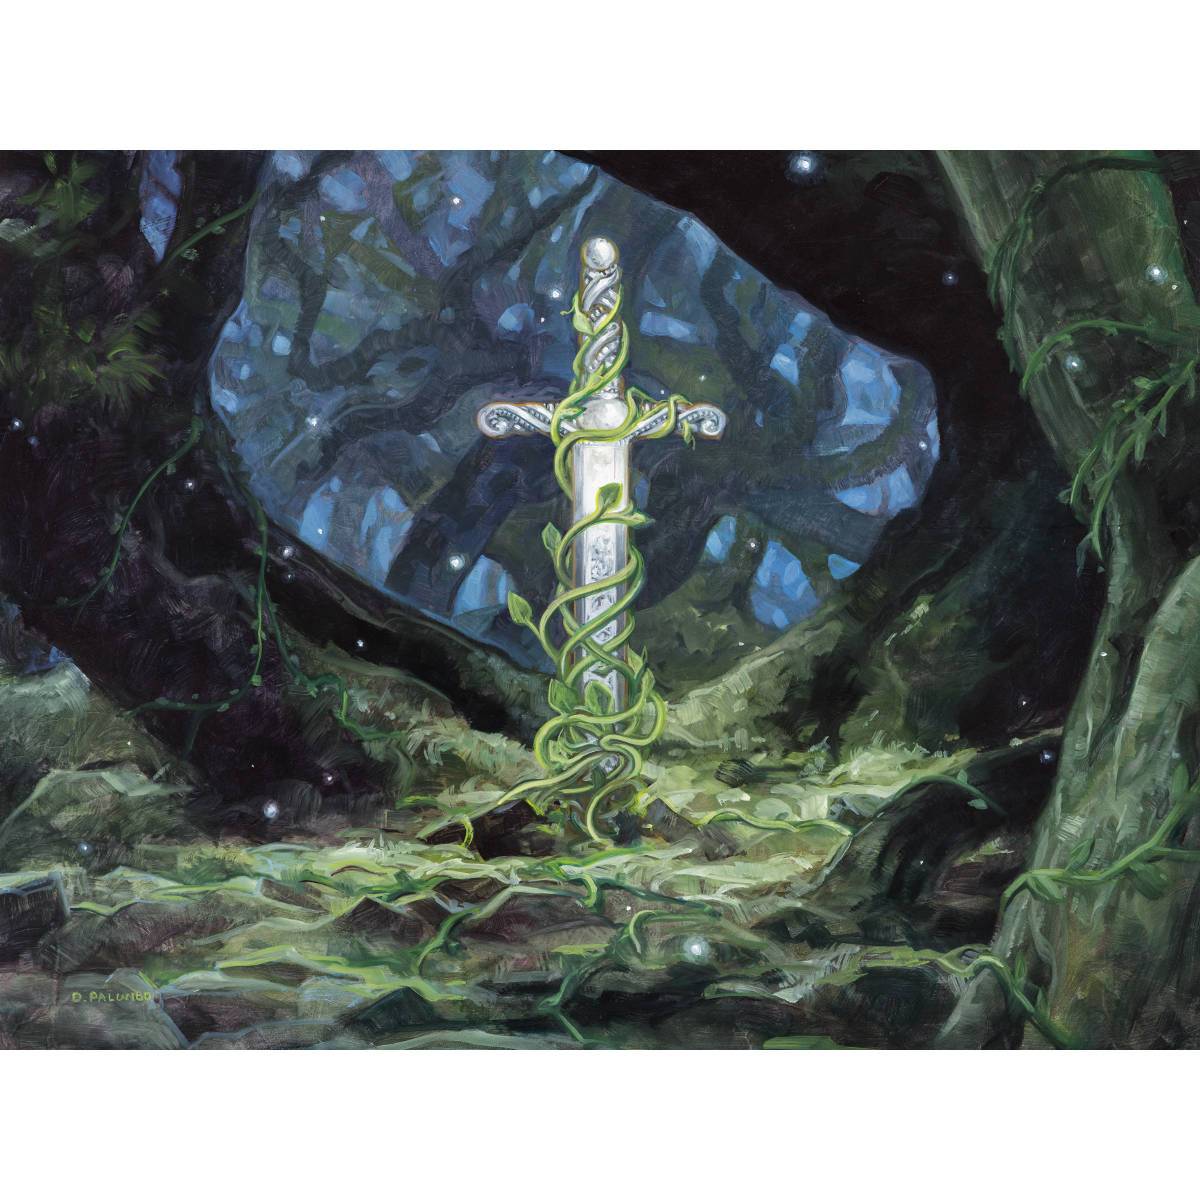 Gaea's Blessing Print - Print - Original Magic Art - Accessories for Magic the Gathering and other card games